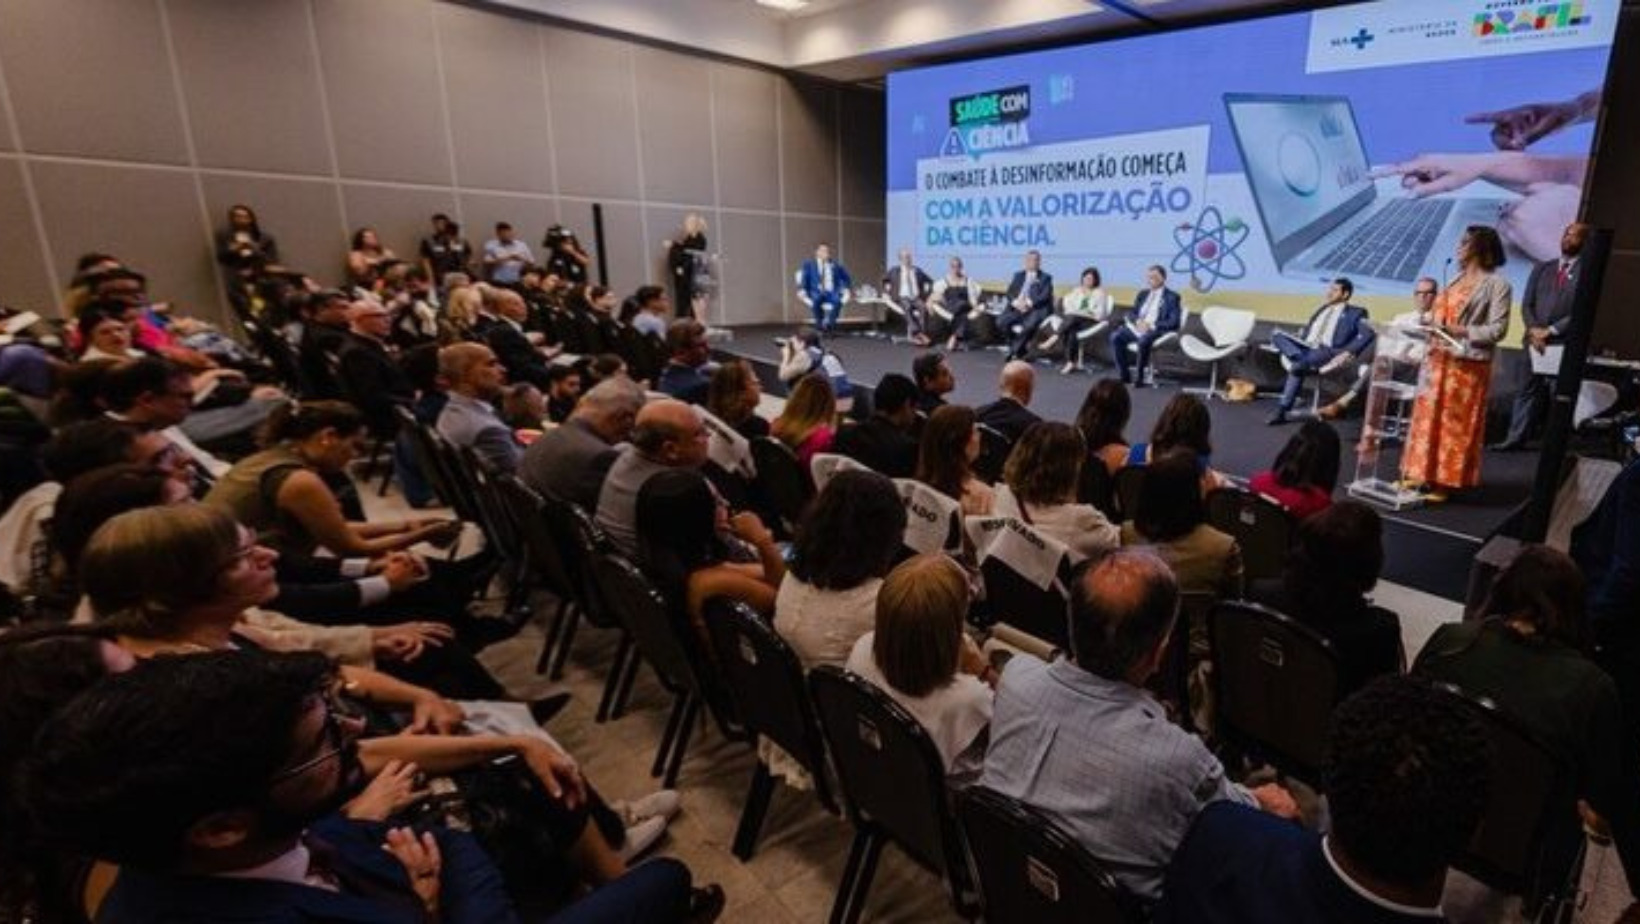 UFPR participates in the National Program for the Popularization of Science, launched by MCTI